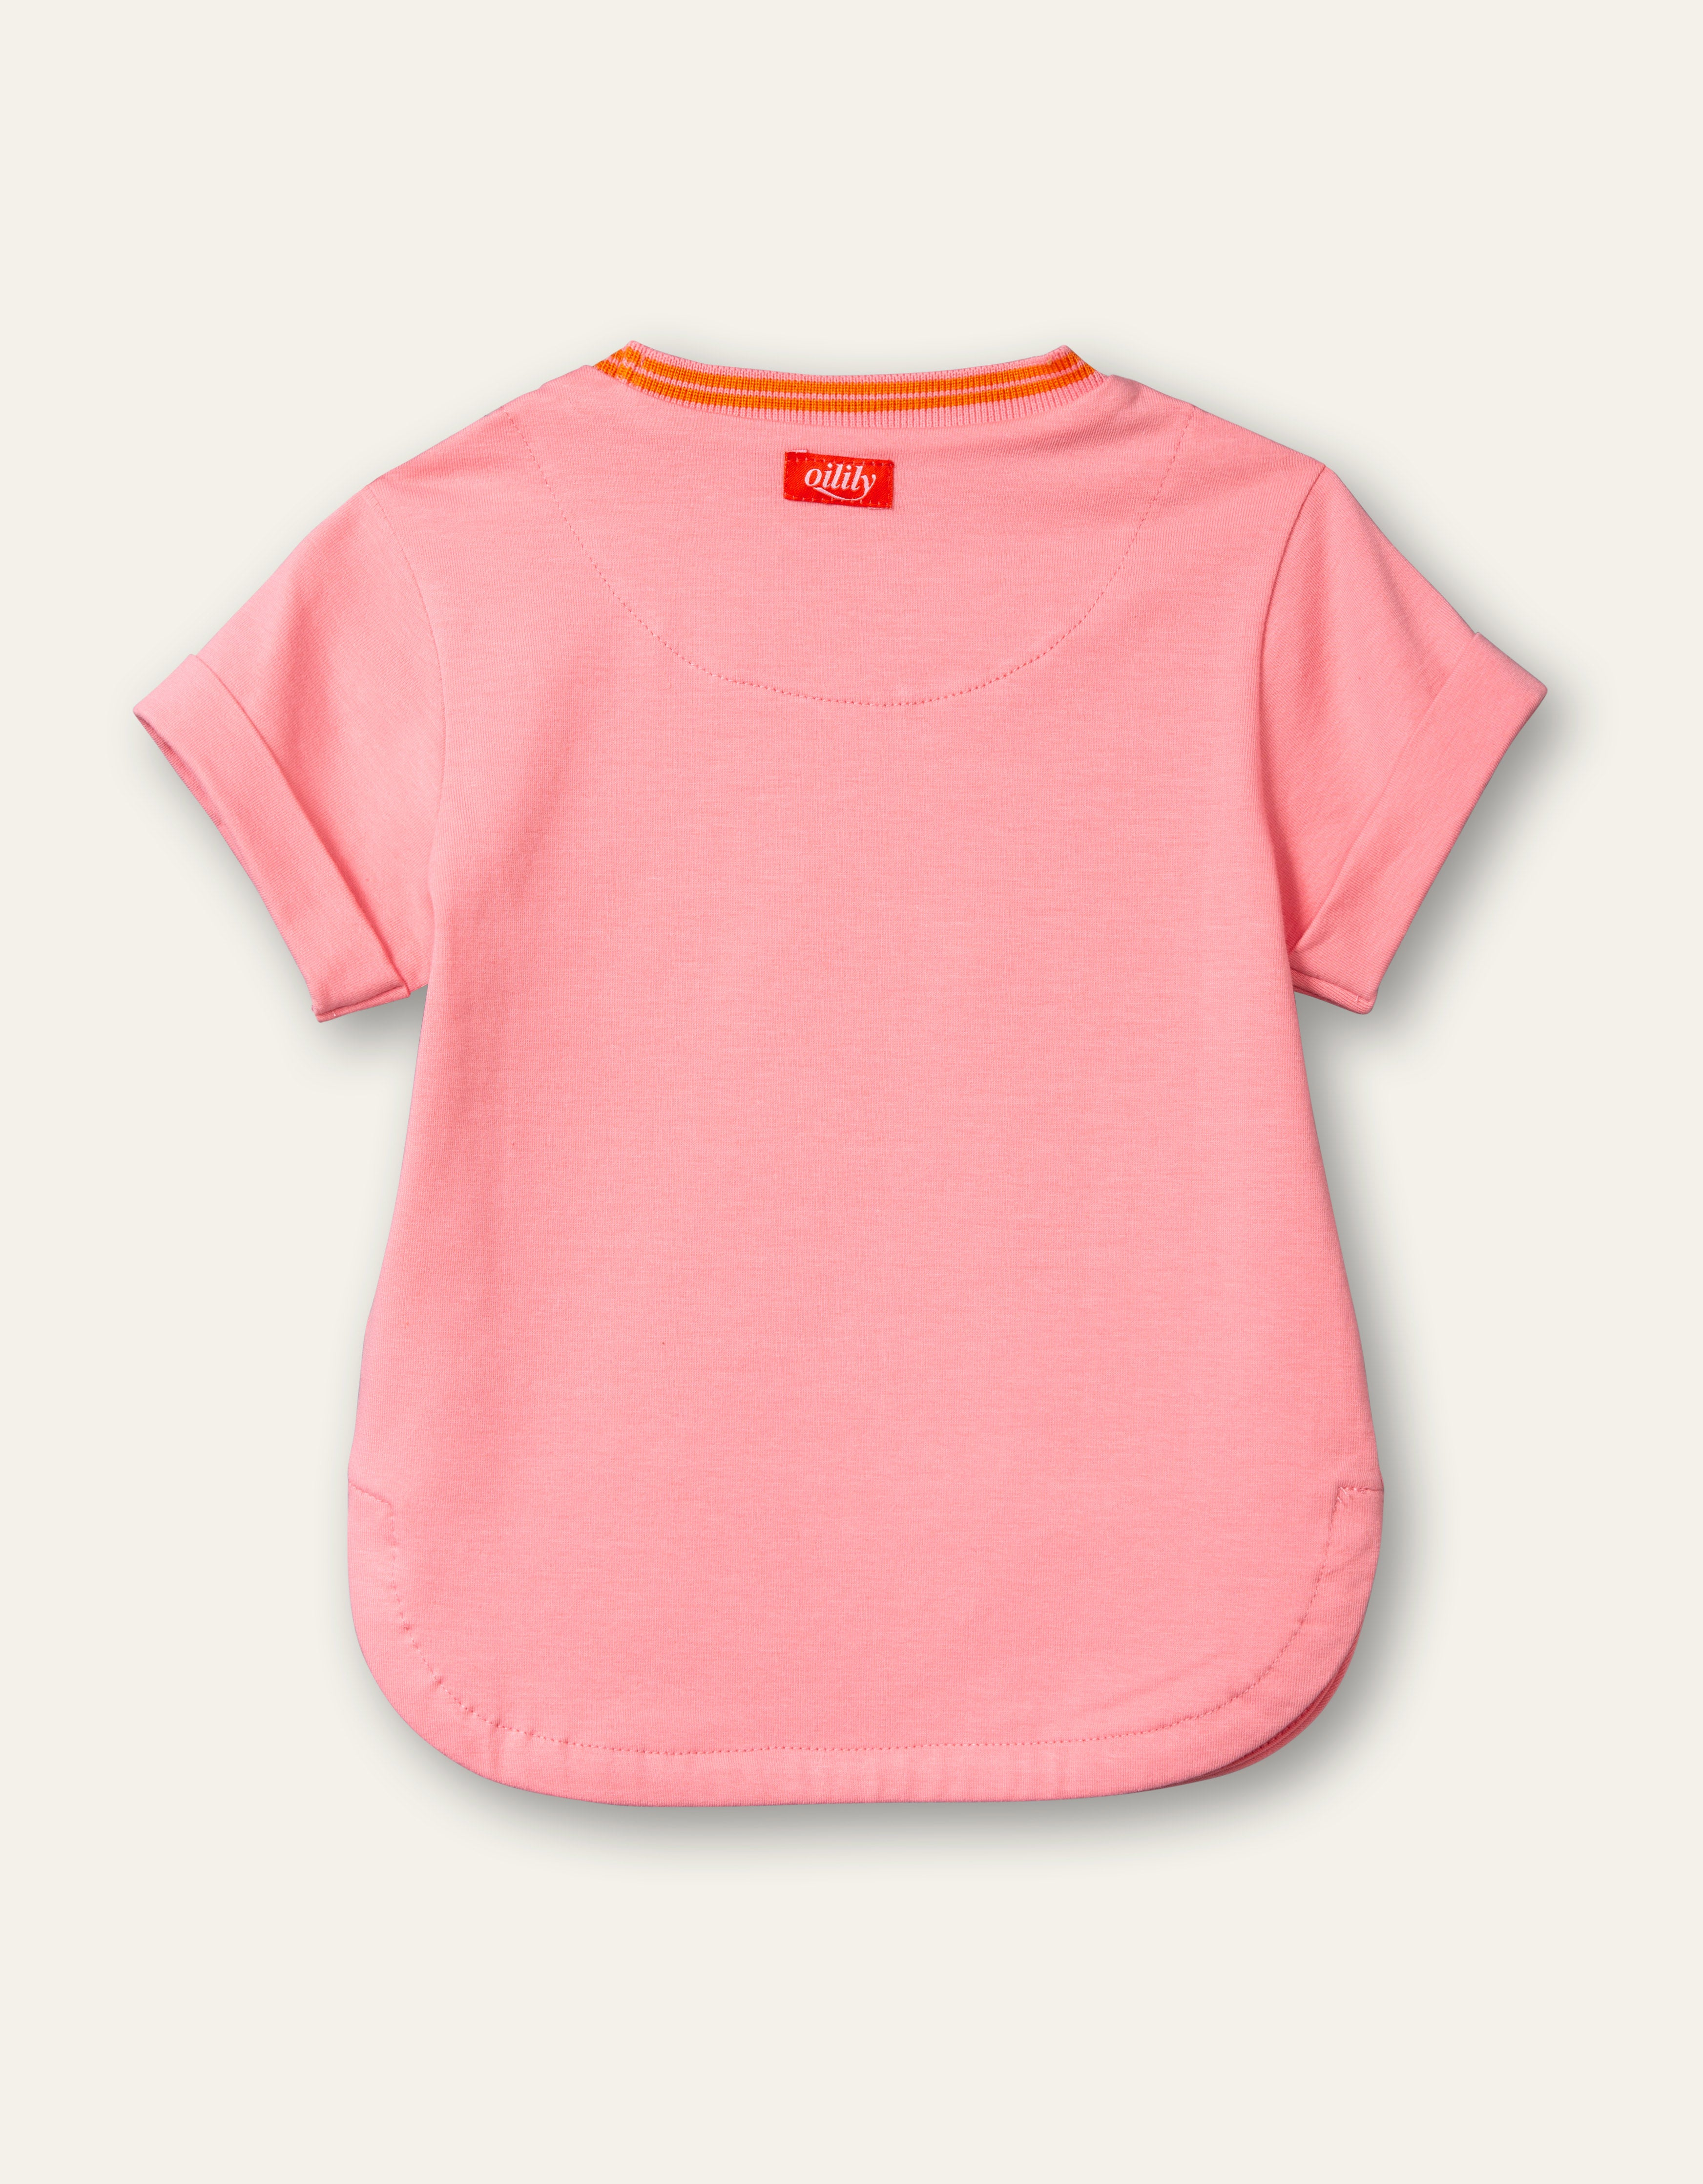 Oilily Terrific T-shirt 32 geranium pink with woven labels pocket